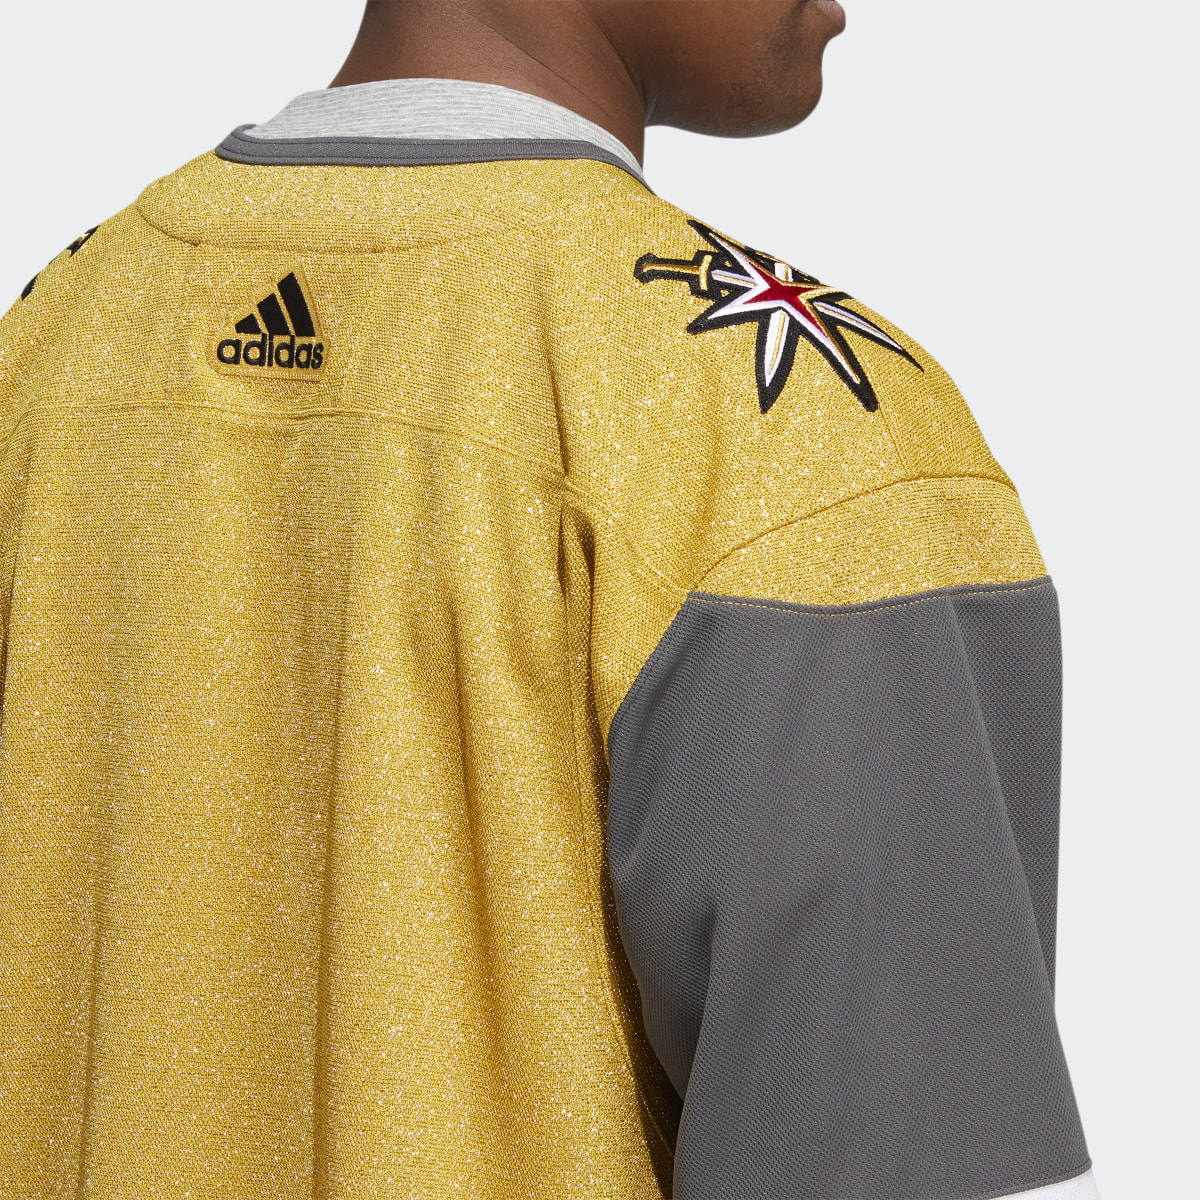 Adidas Golden Knights Home Authentic Jersey. 7